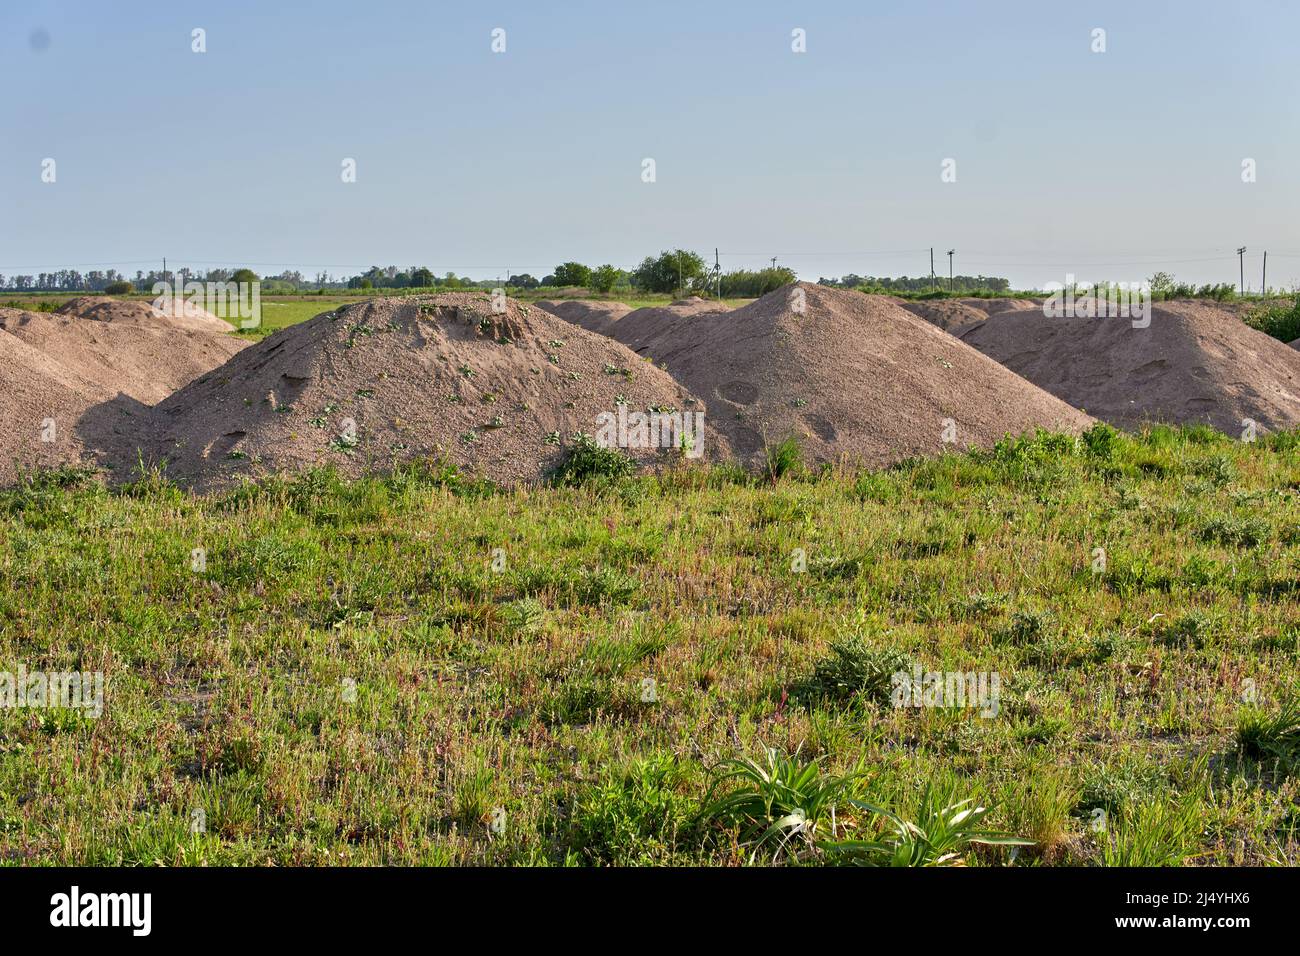 Land of Construction in rural Area in Argentina. Piles of dirt hauled on lots prepared for construction. Horizontal Stock Photo